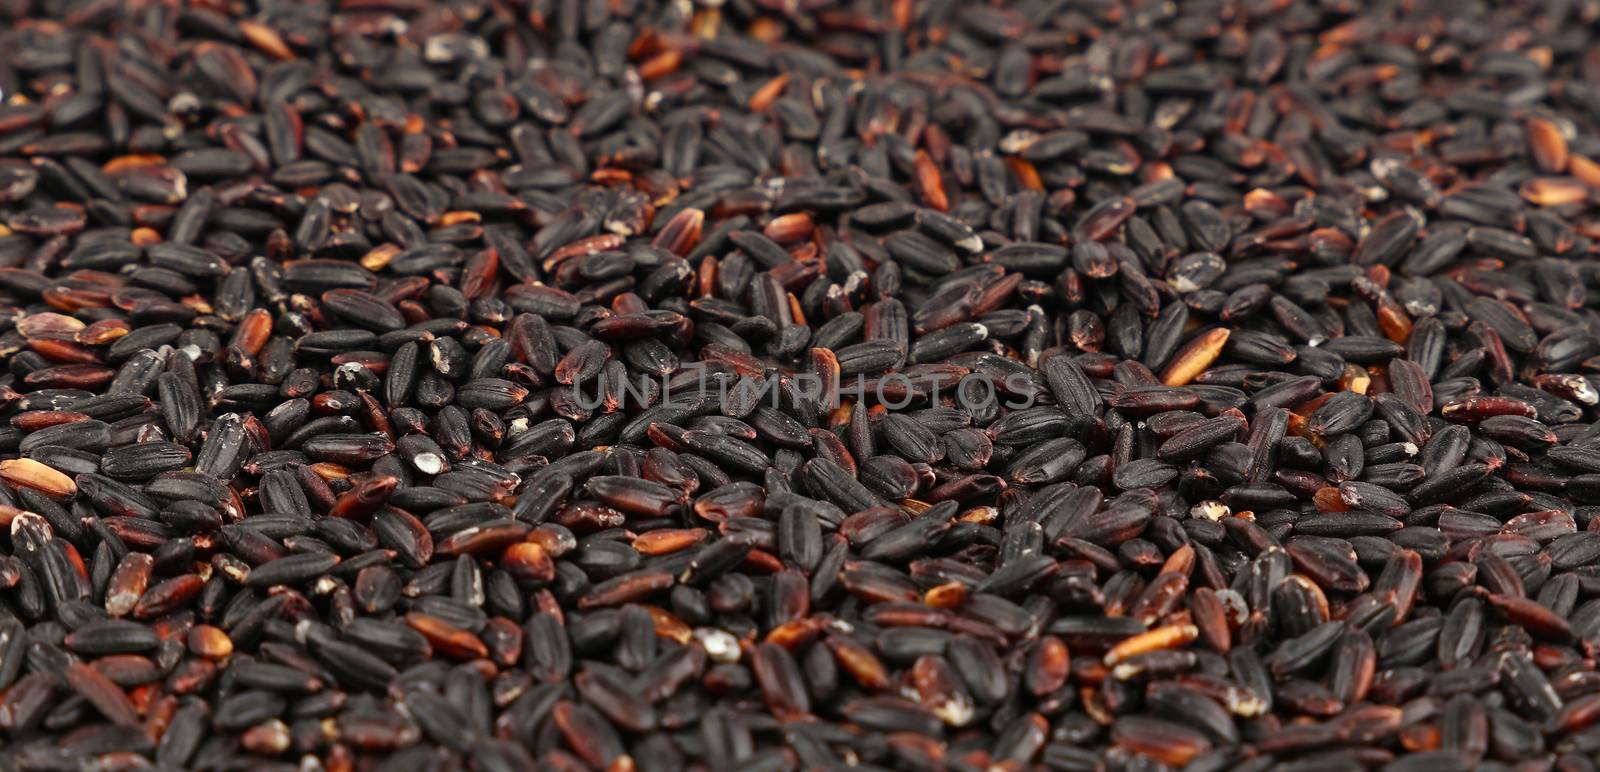 Black purple raw rice close up background by BreakingTheWalls